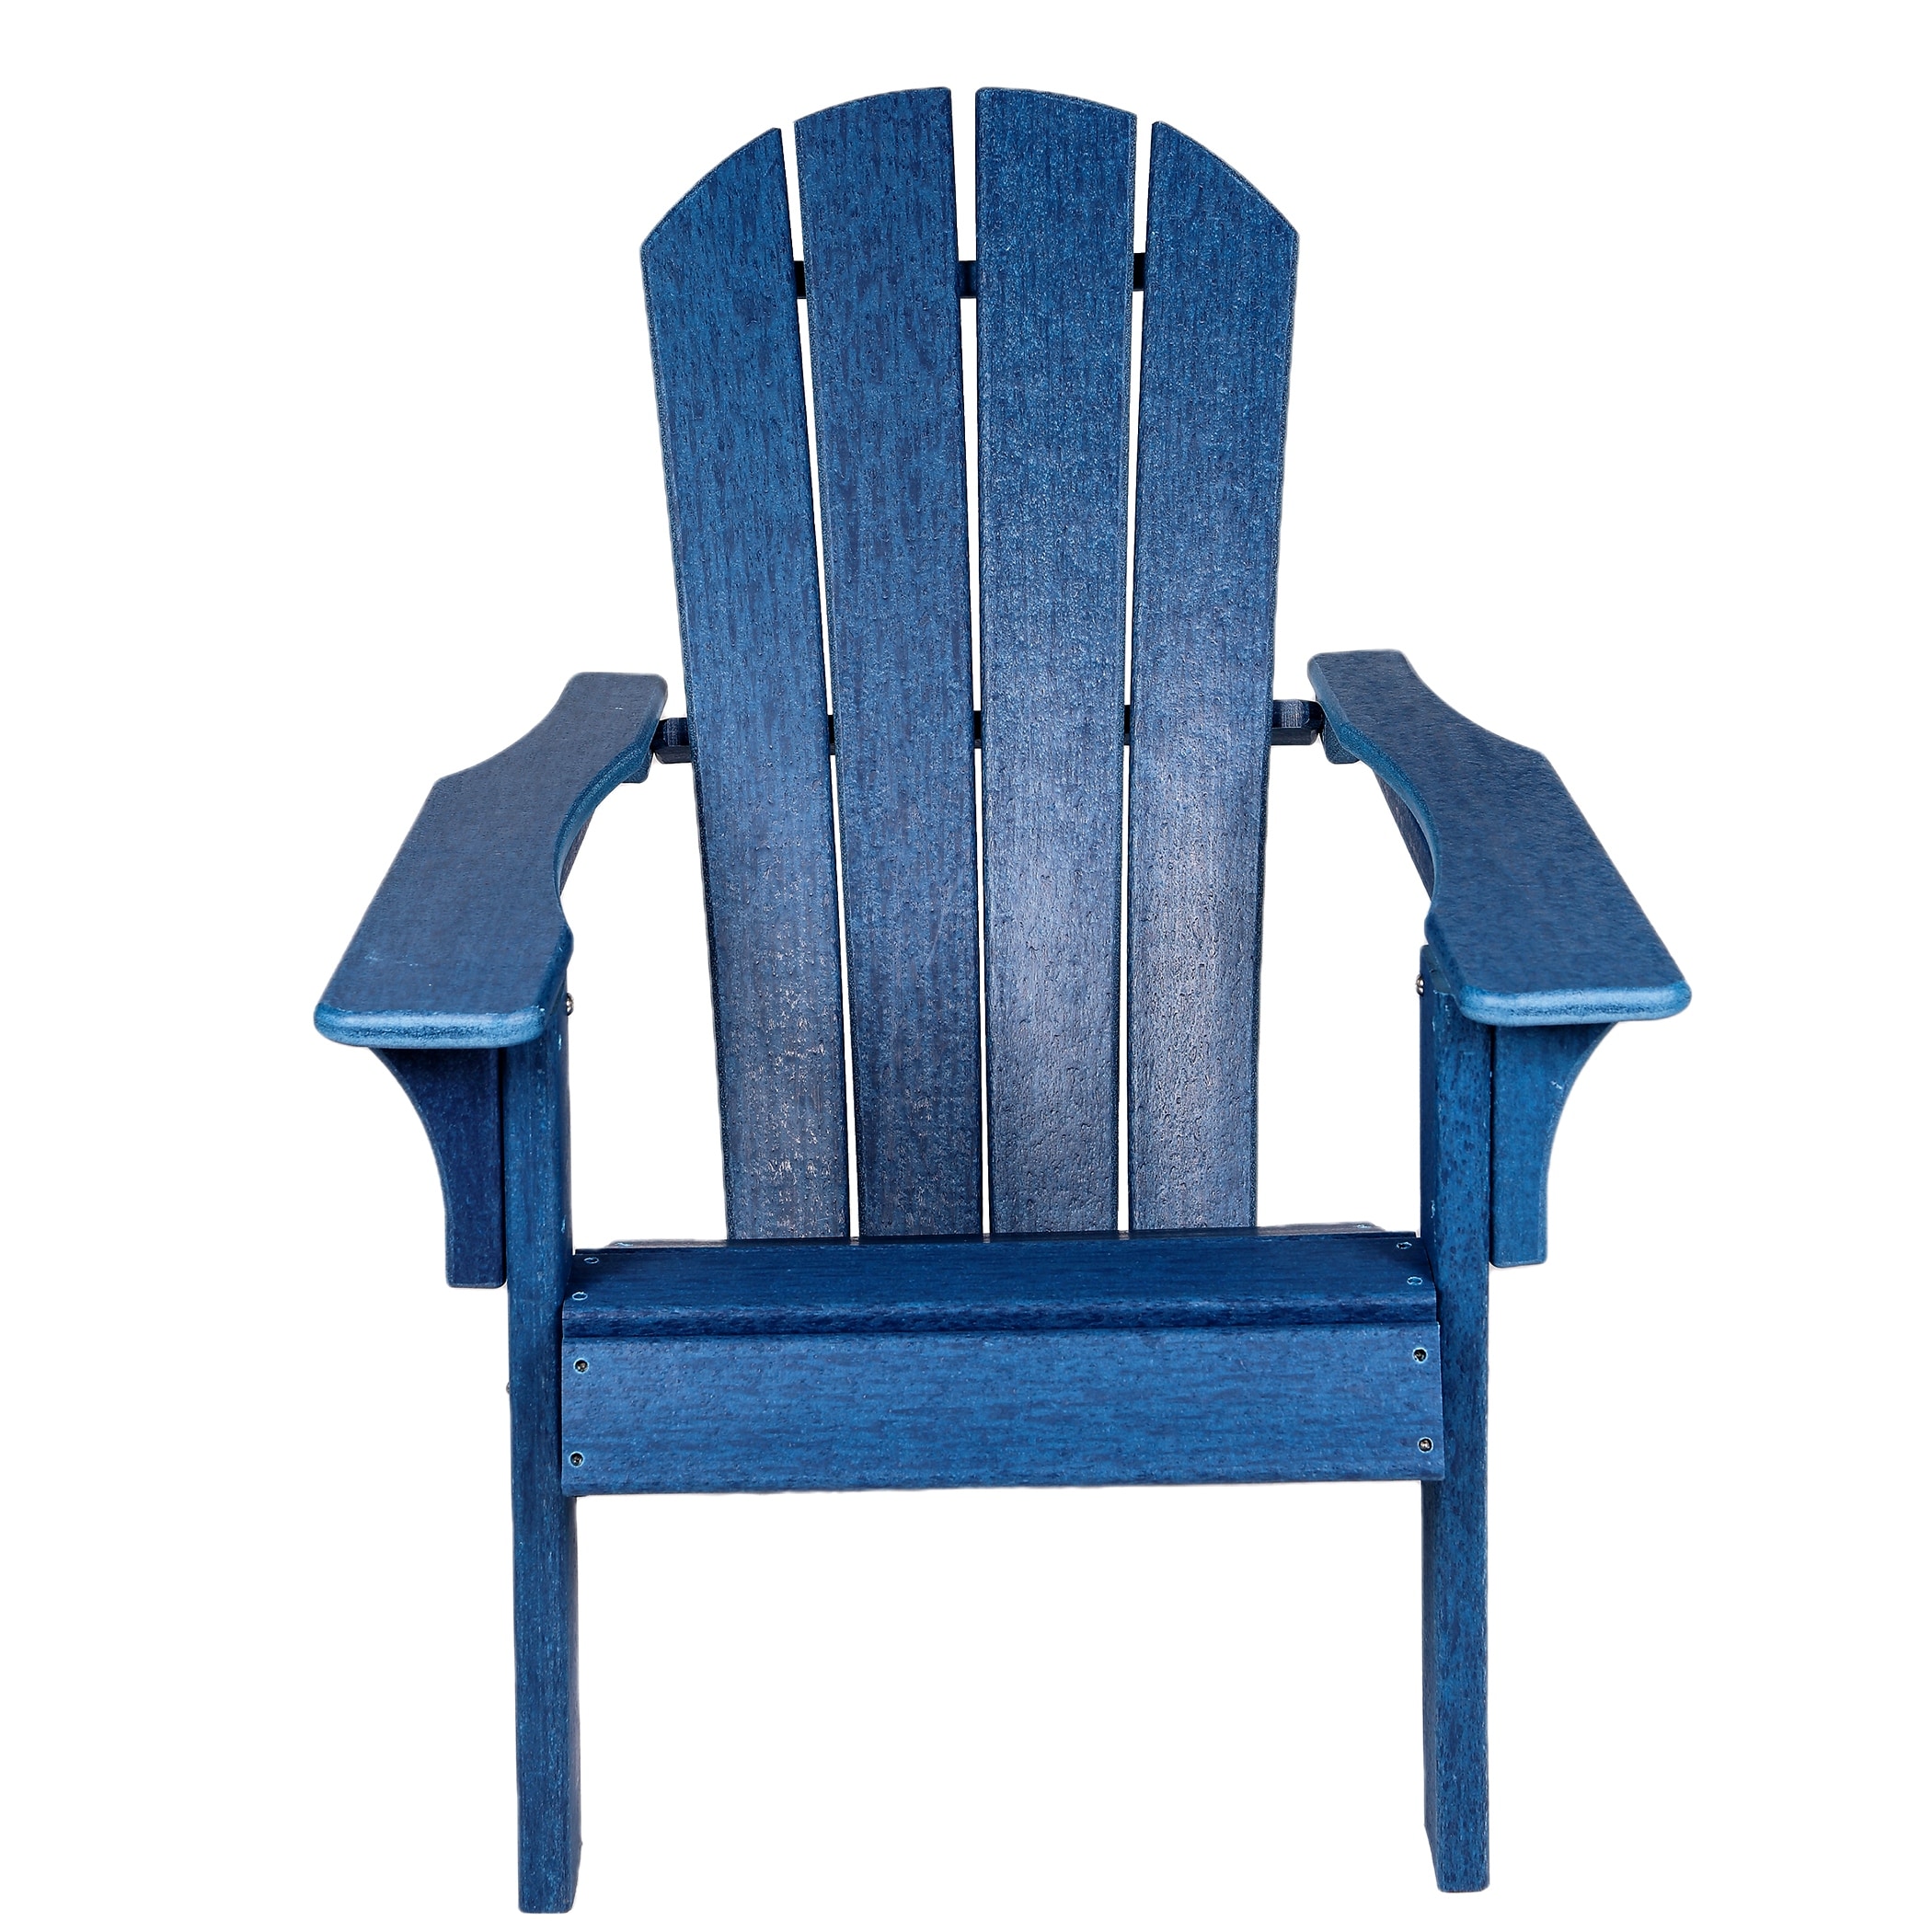 Patio Adirondack Chairs Ergonomic Comfort Widely Used For Fire Pits Decks Gardens Campfire Chairs